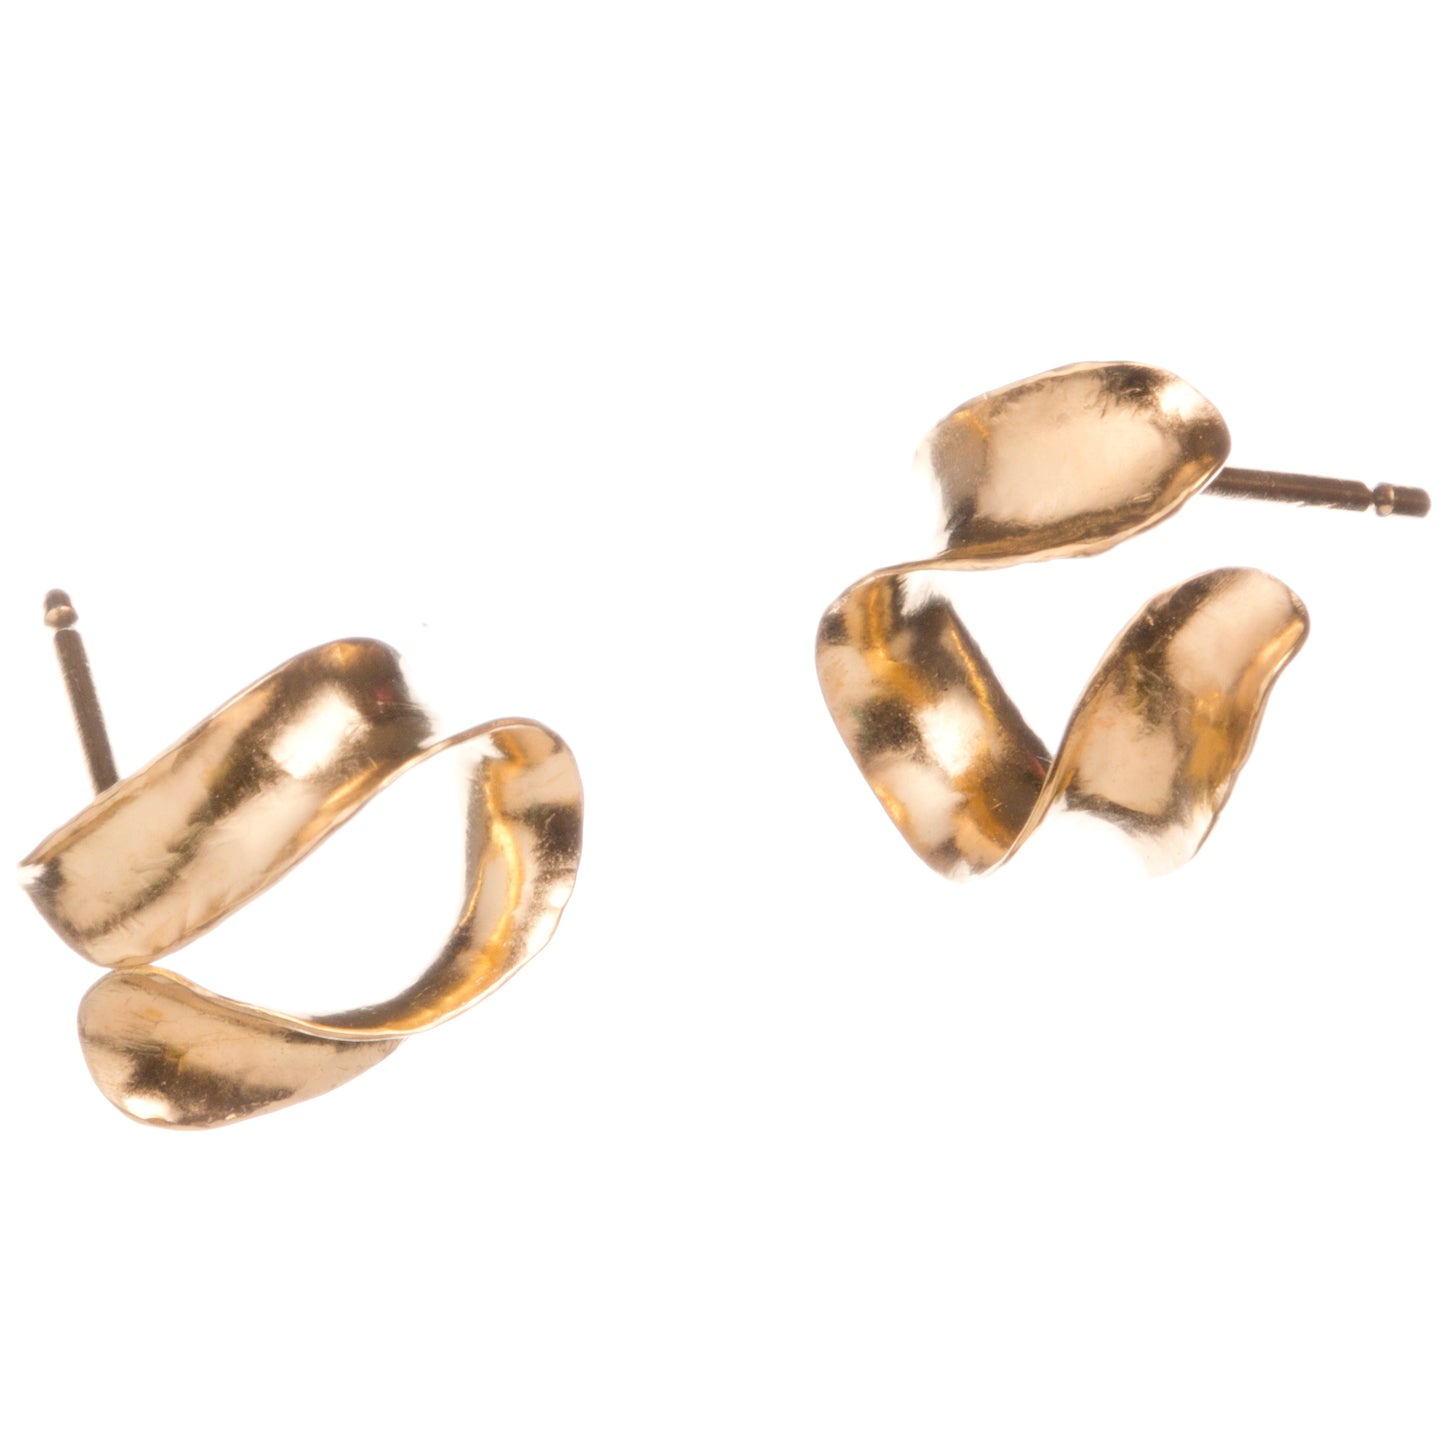 A pair of lightweight silver horseshoe earrings, gold plated, which curl gently below the earlobe. The different views show the three-dimensional curve. They fasten with a silver butterfly.